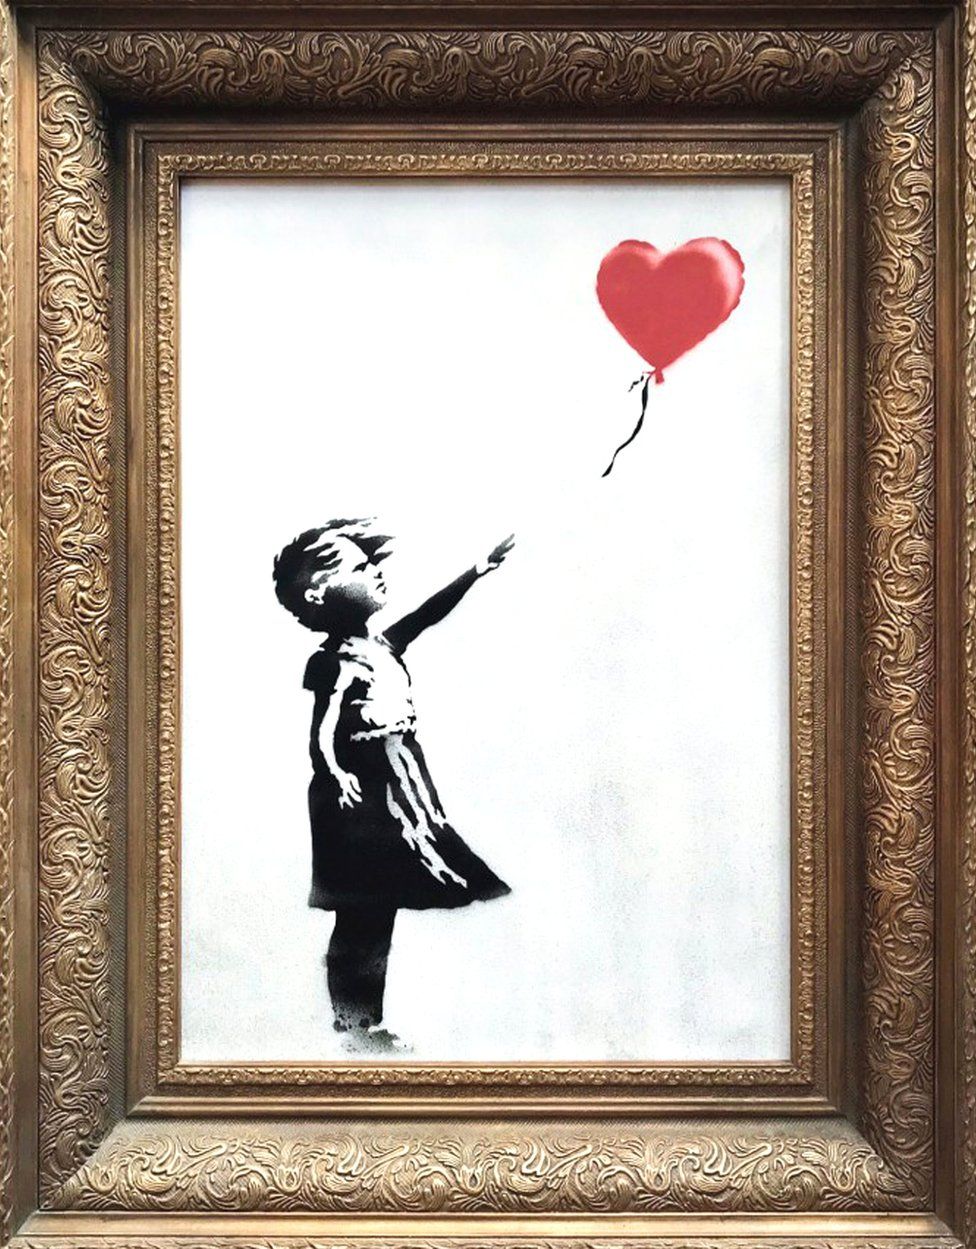 Banksy's Girl With Balloon, 2006